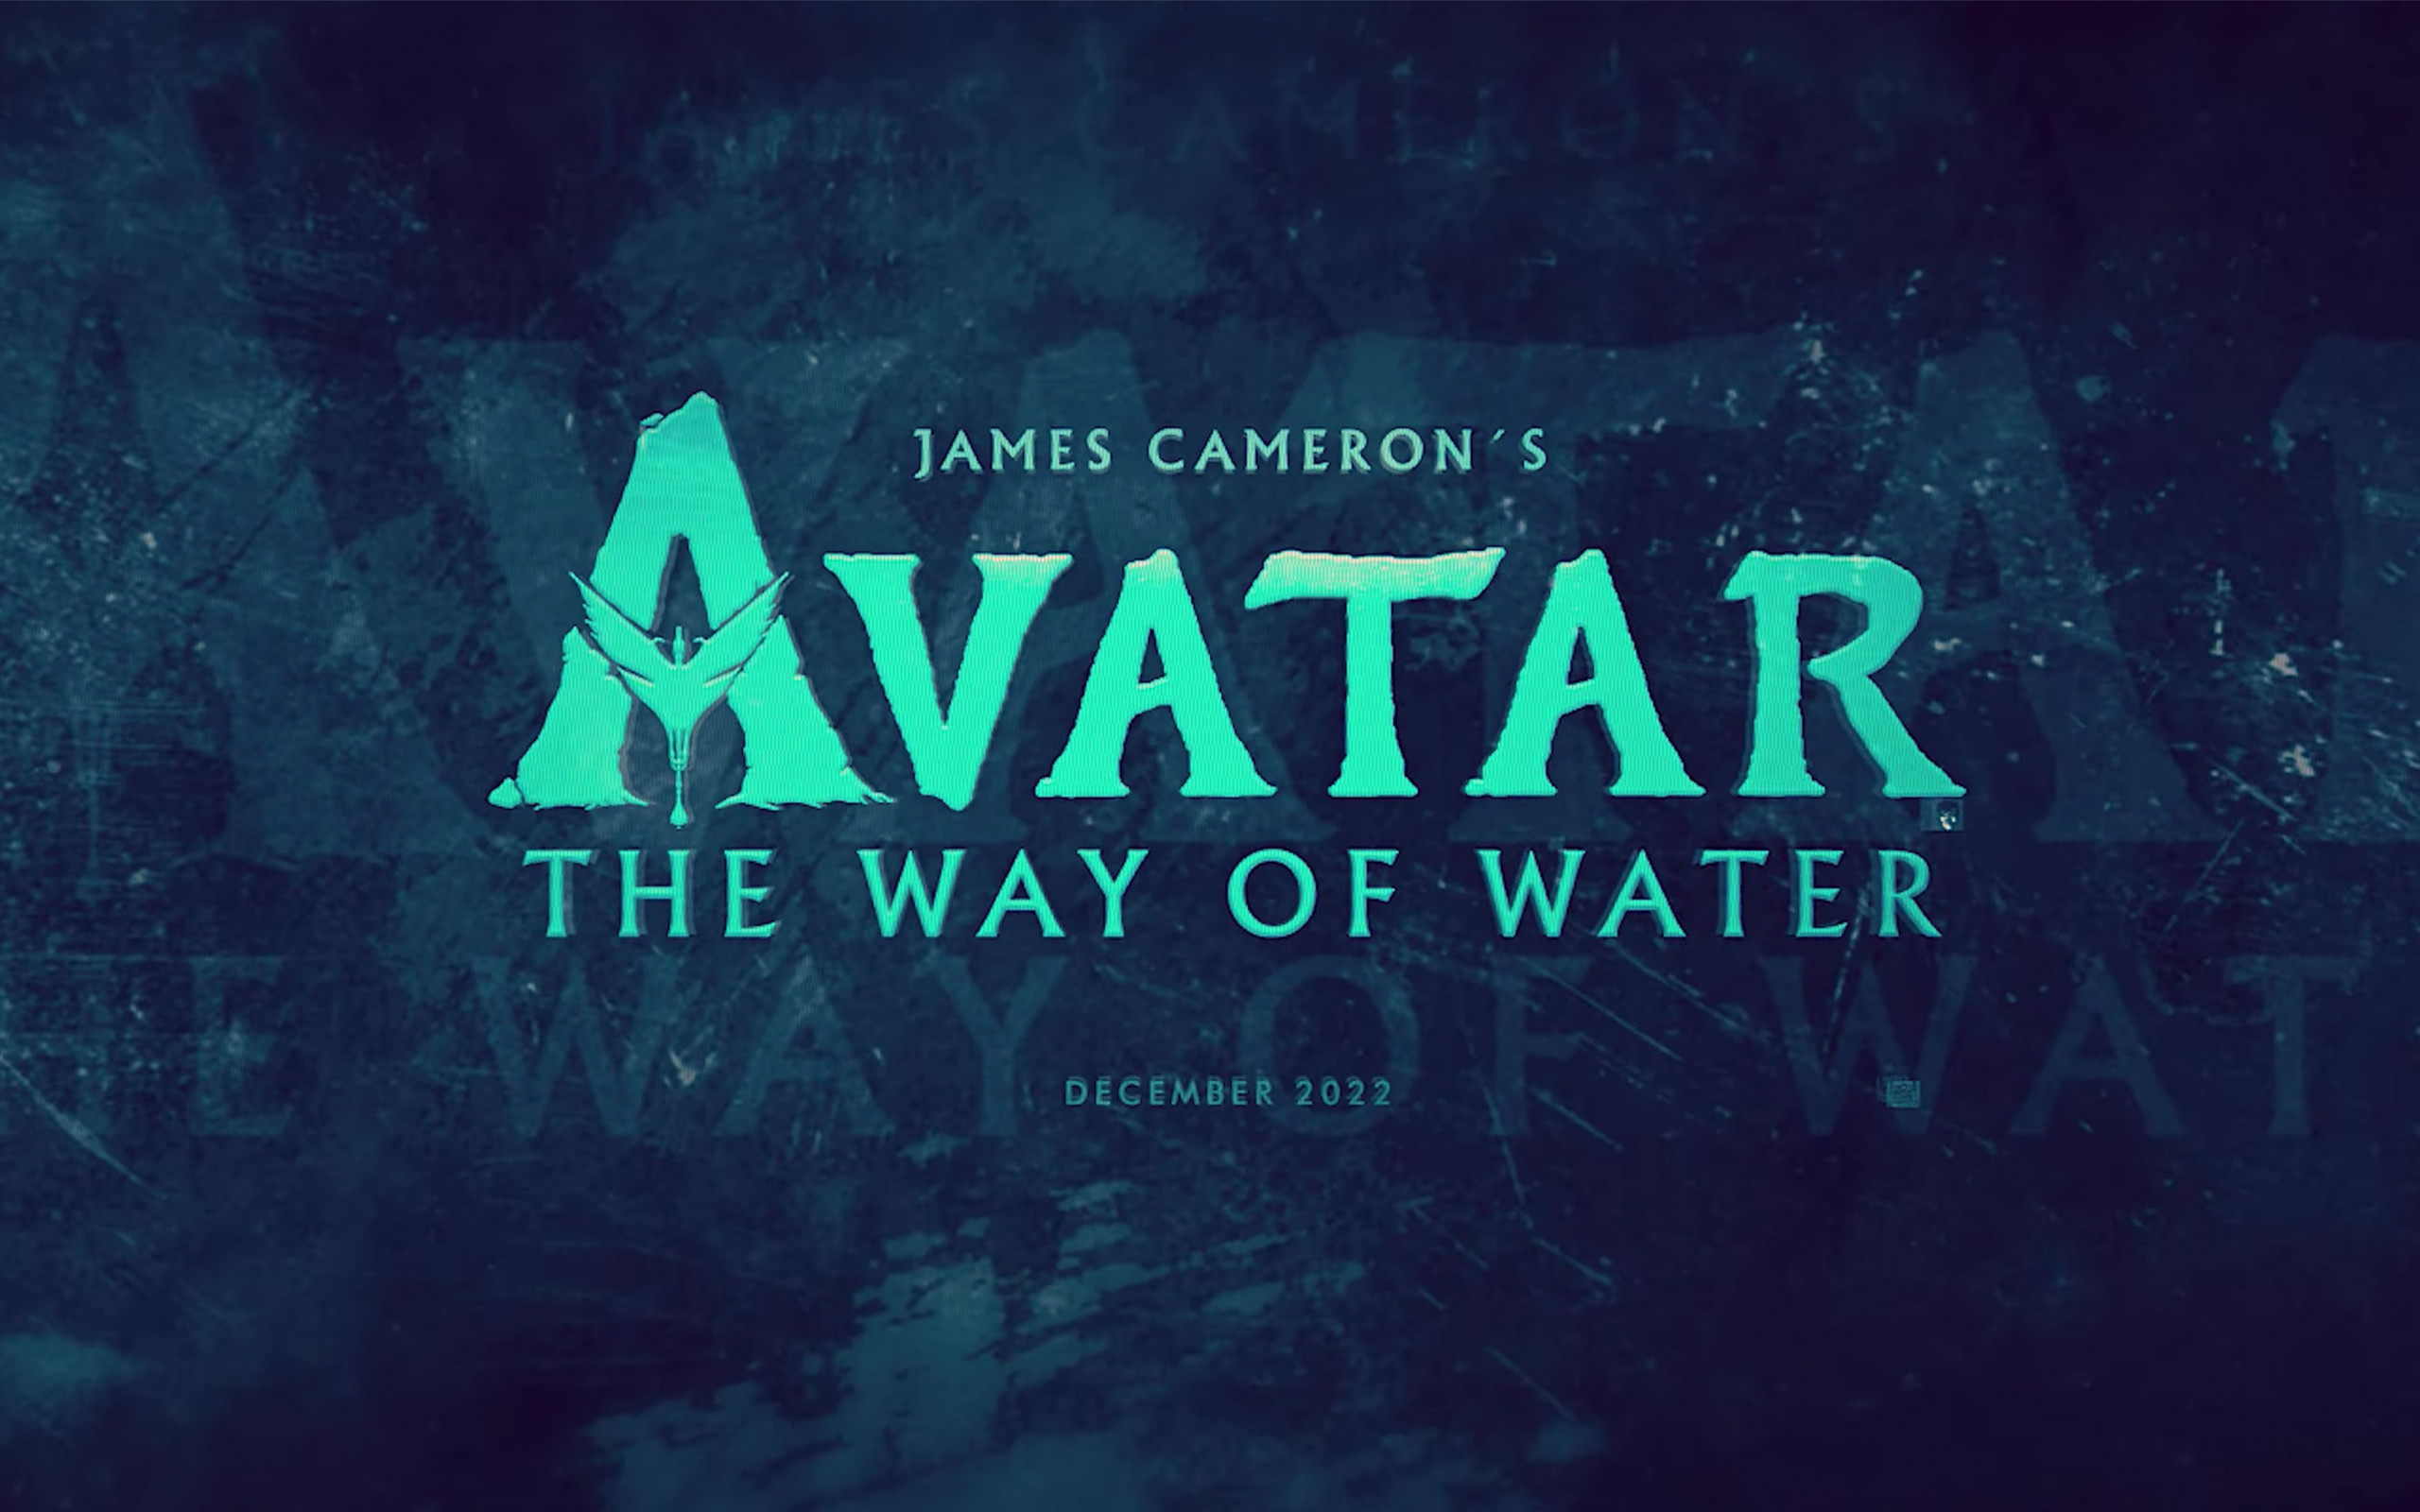 Avatar 2 The Way of Water wallpaper 2560x1600